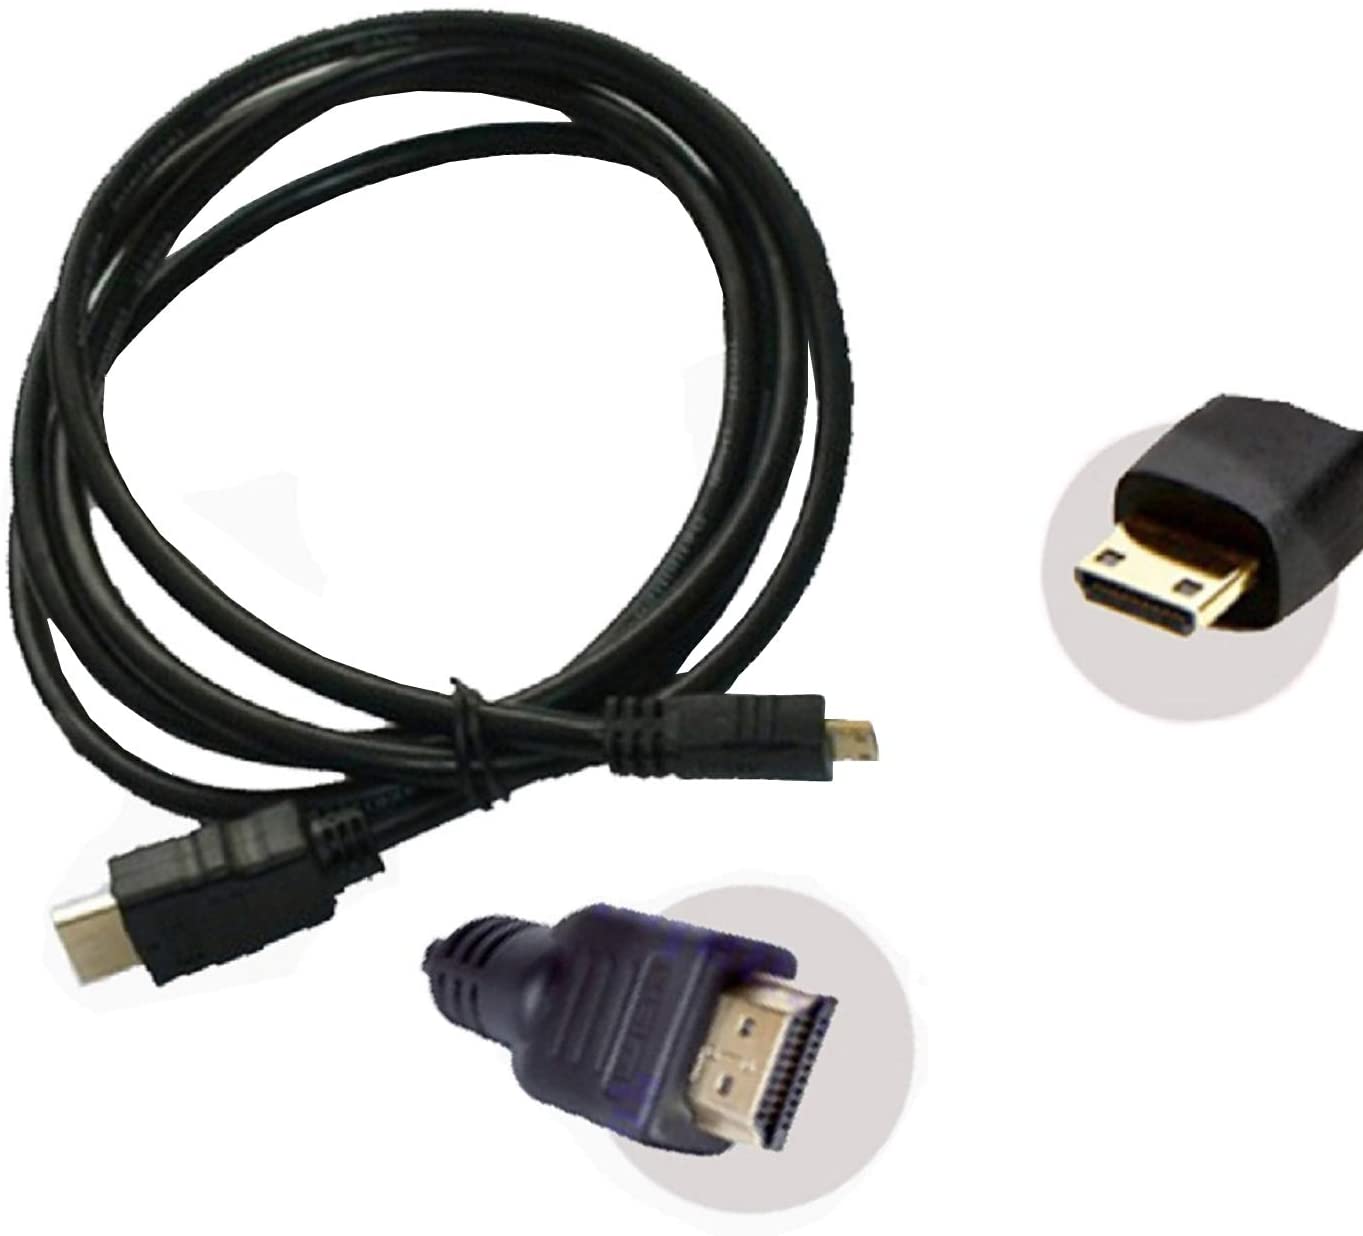 UpBright Mini HDMI Audio Video HDTV Cable Cord Compatible with ICOO D90Pro Android Dual Core WI-FI Tablet PC - image 1 of 5